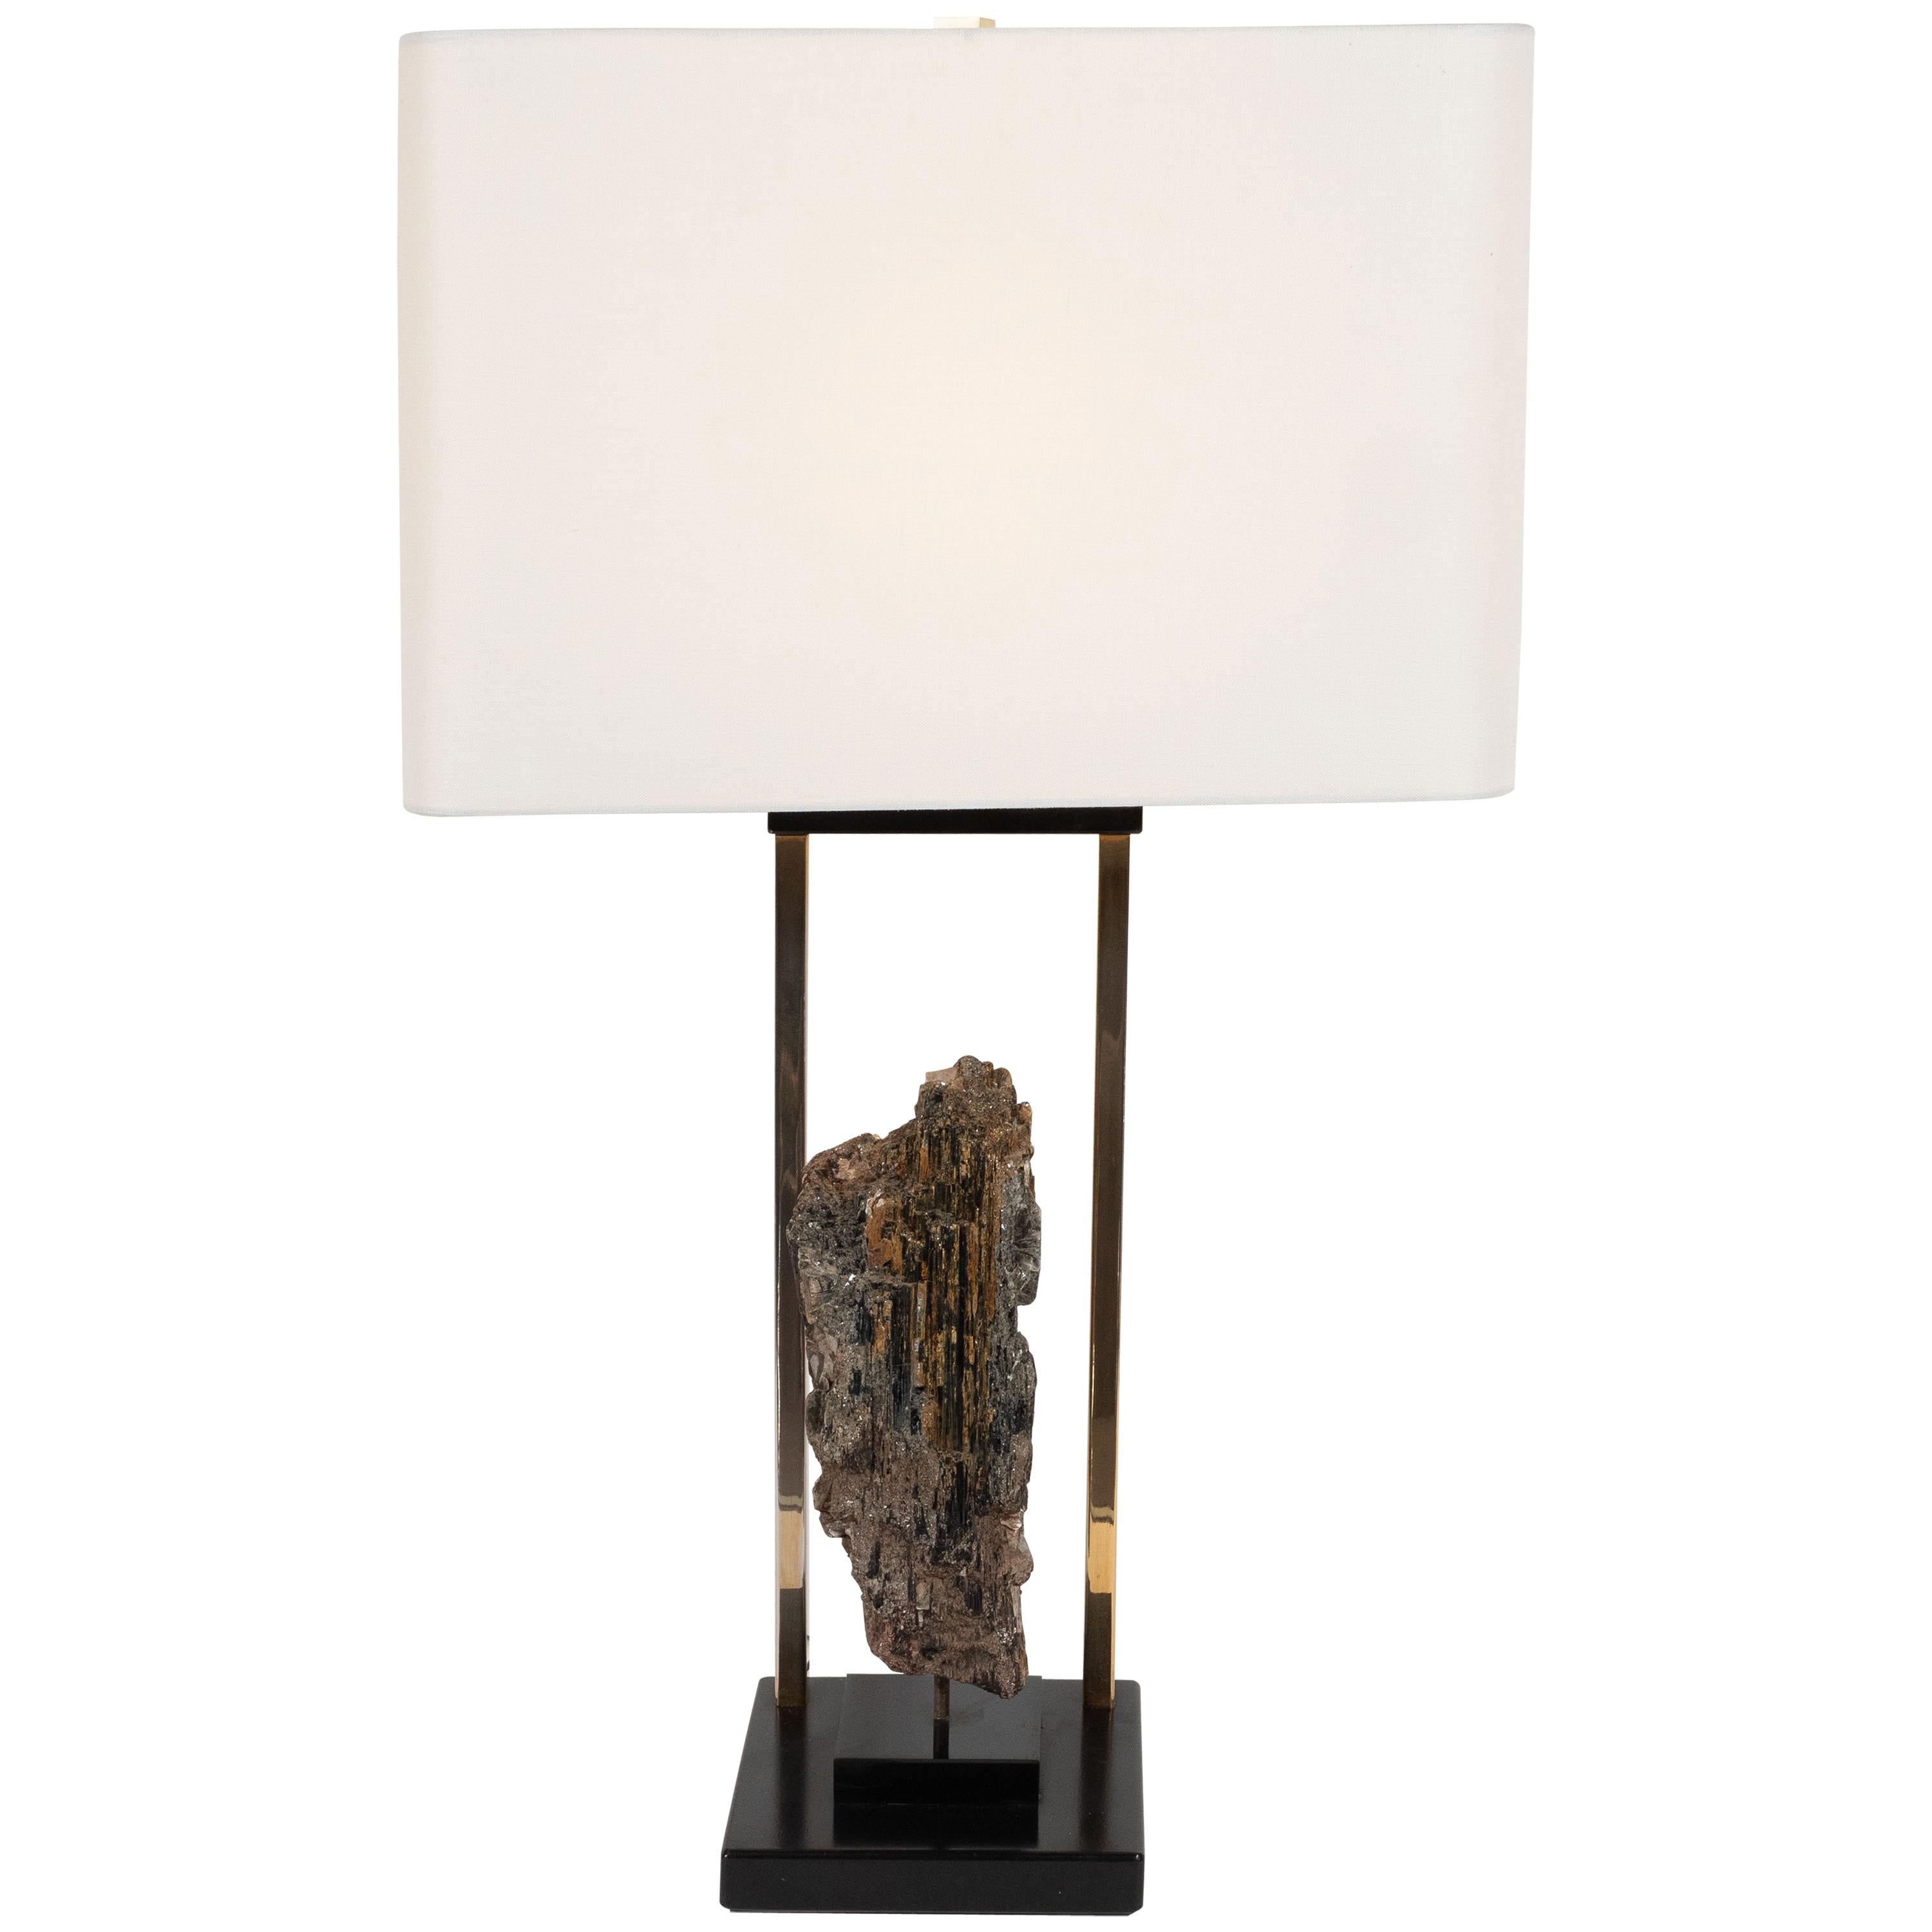 Midcentury Organic Modern Mica, Brass, Black Enamel and Resin Table Lamp For Sale